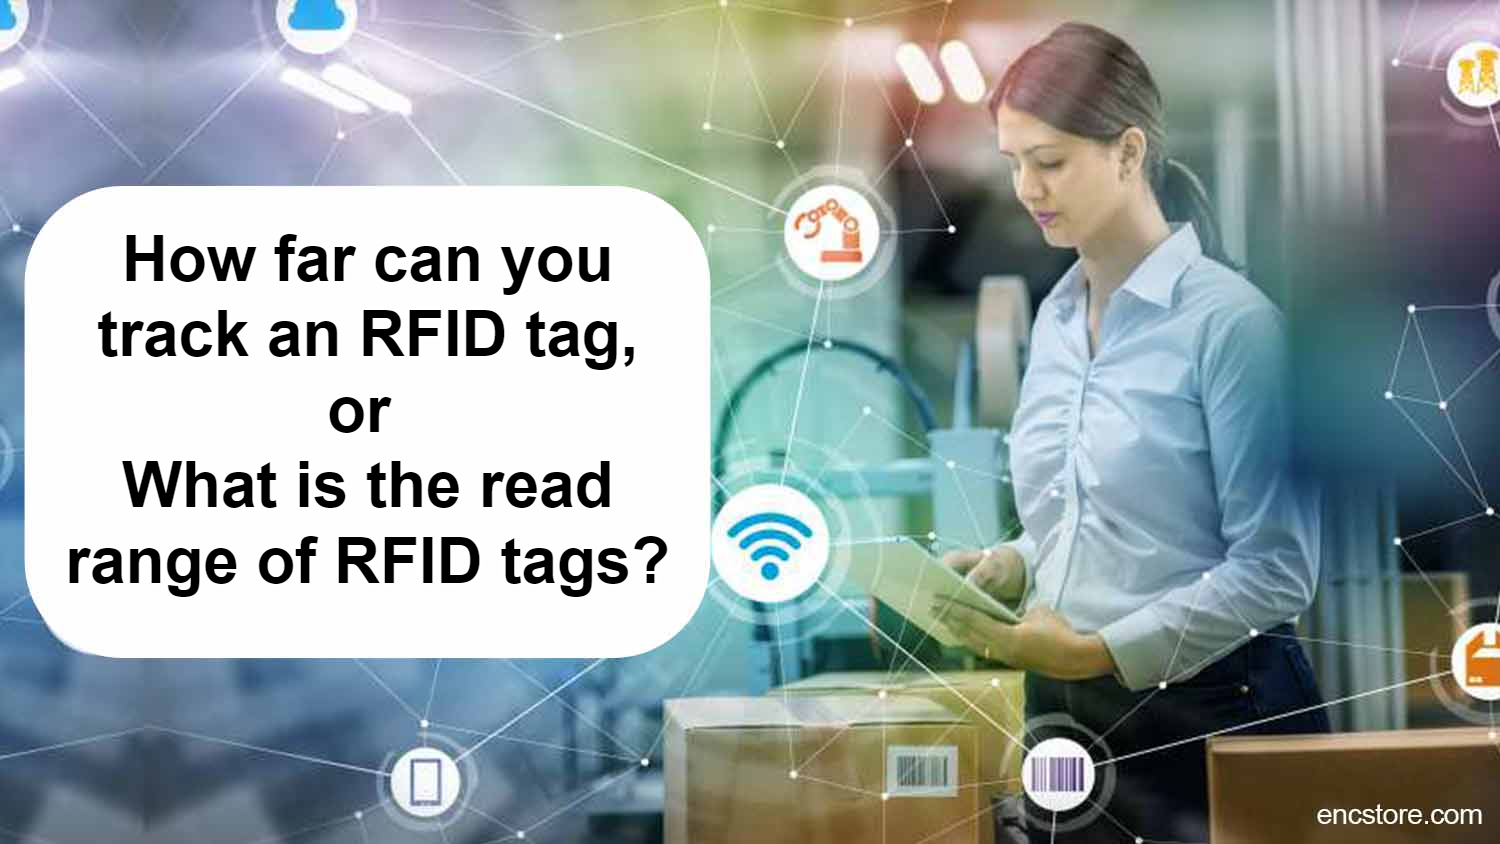 How far can you track an RFID tag, or what is the read range of RFID tags?